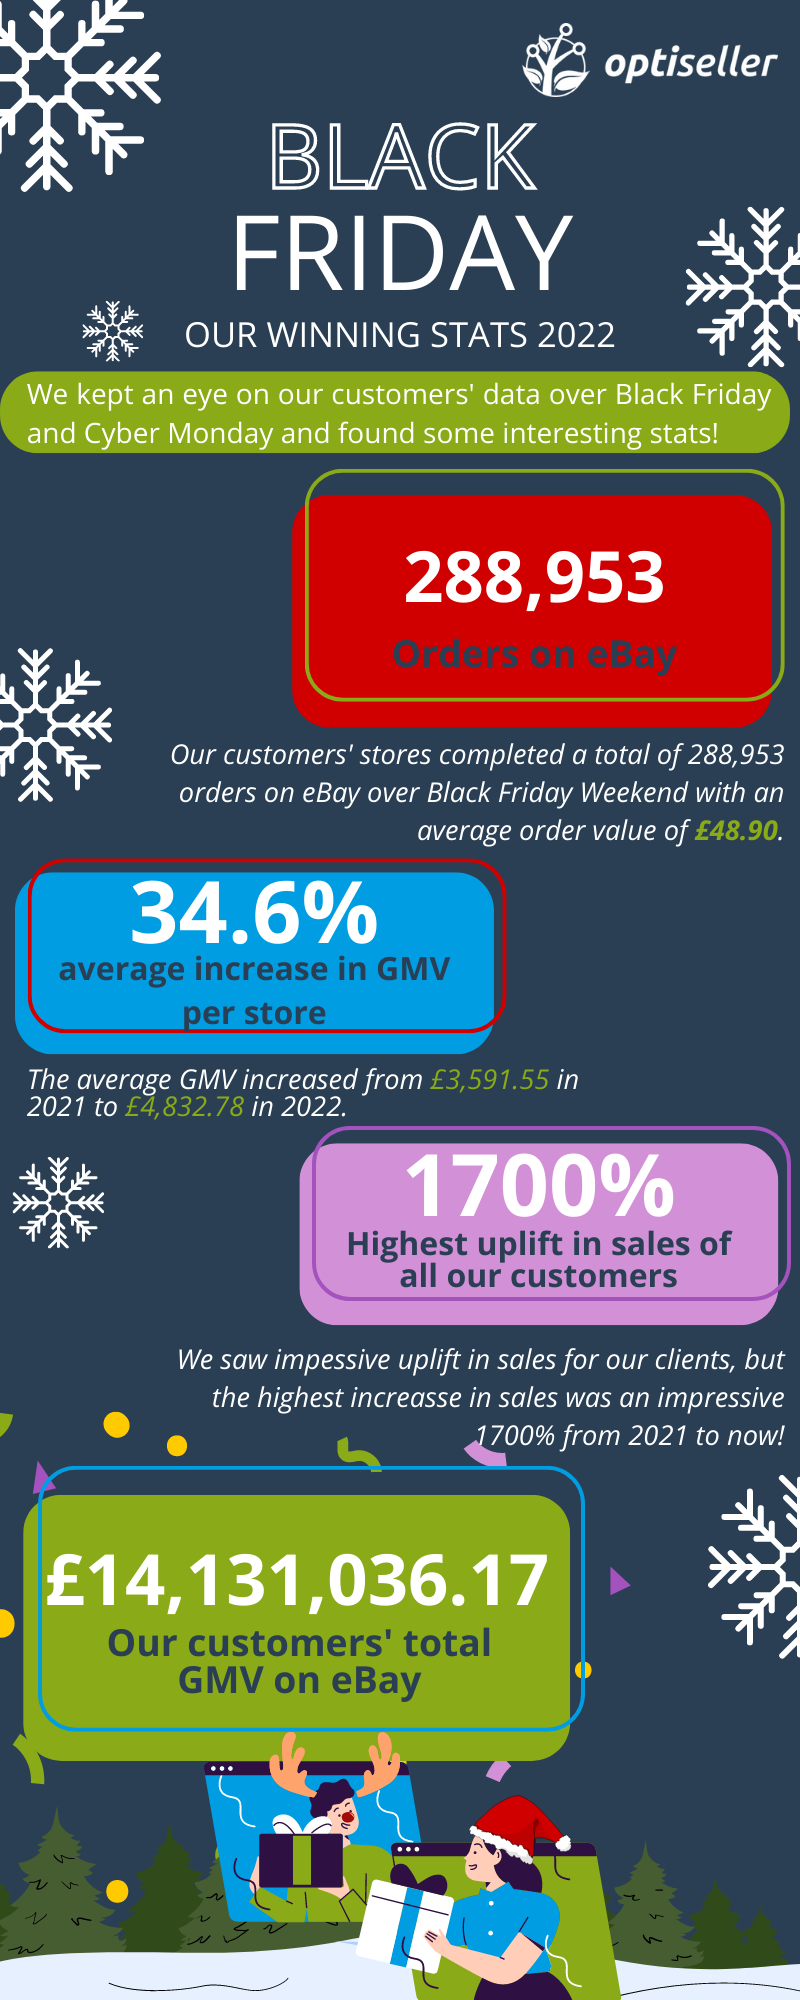 Black Friday: Our Winning stats 2022. Our customers' stores completed a total of 288,953 orders on eBay over Black Friday Weekend with an average order value of £48.90. The average GMV increased from £3,591.55 in 2021 to £4,832.78 in 2022 which is an increase of 34.6% YoY. We saw impessive uplift in sales for our clients, but the highest increasse in sales was an impressive 1700% from 2021 to now! Our customers' total GMV on eBay this year is £14,131,036.17.